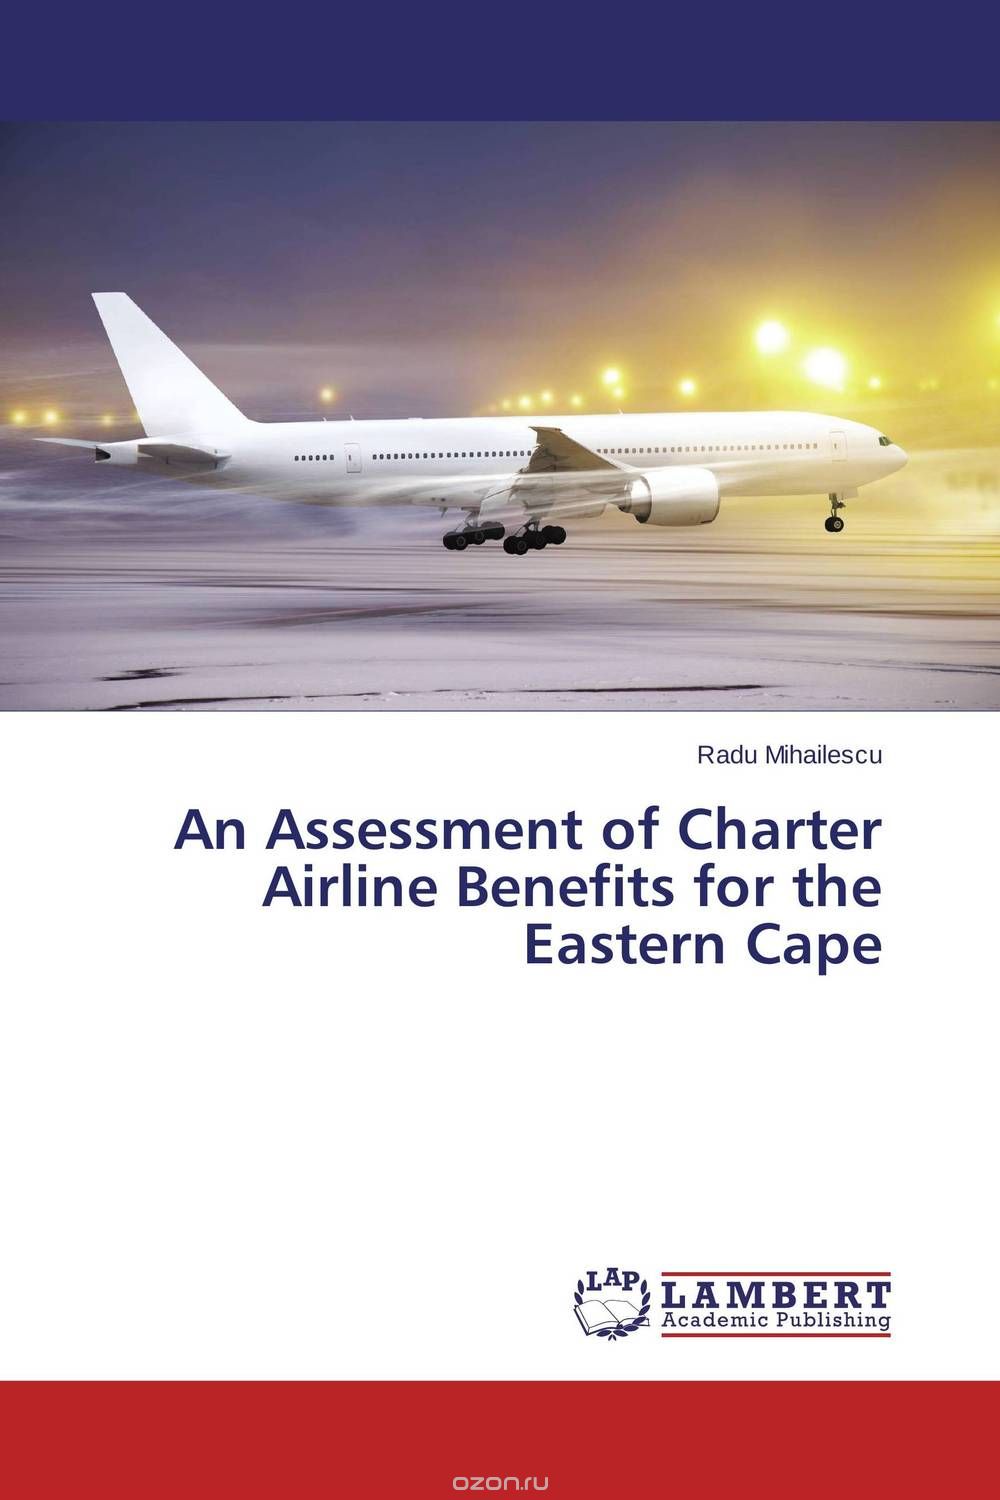 An Assessment of Charter Airline Benefits for the Eastern Cape